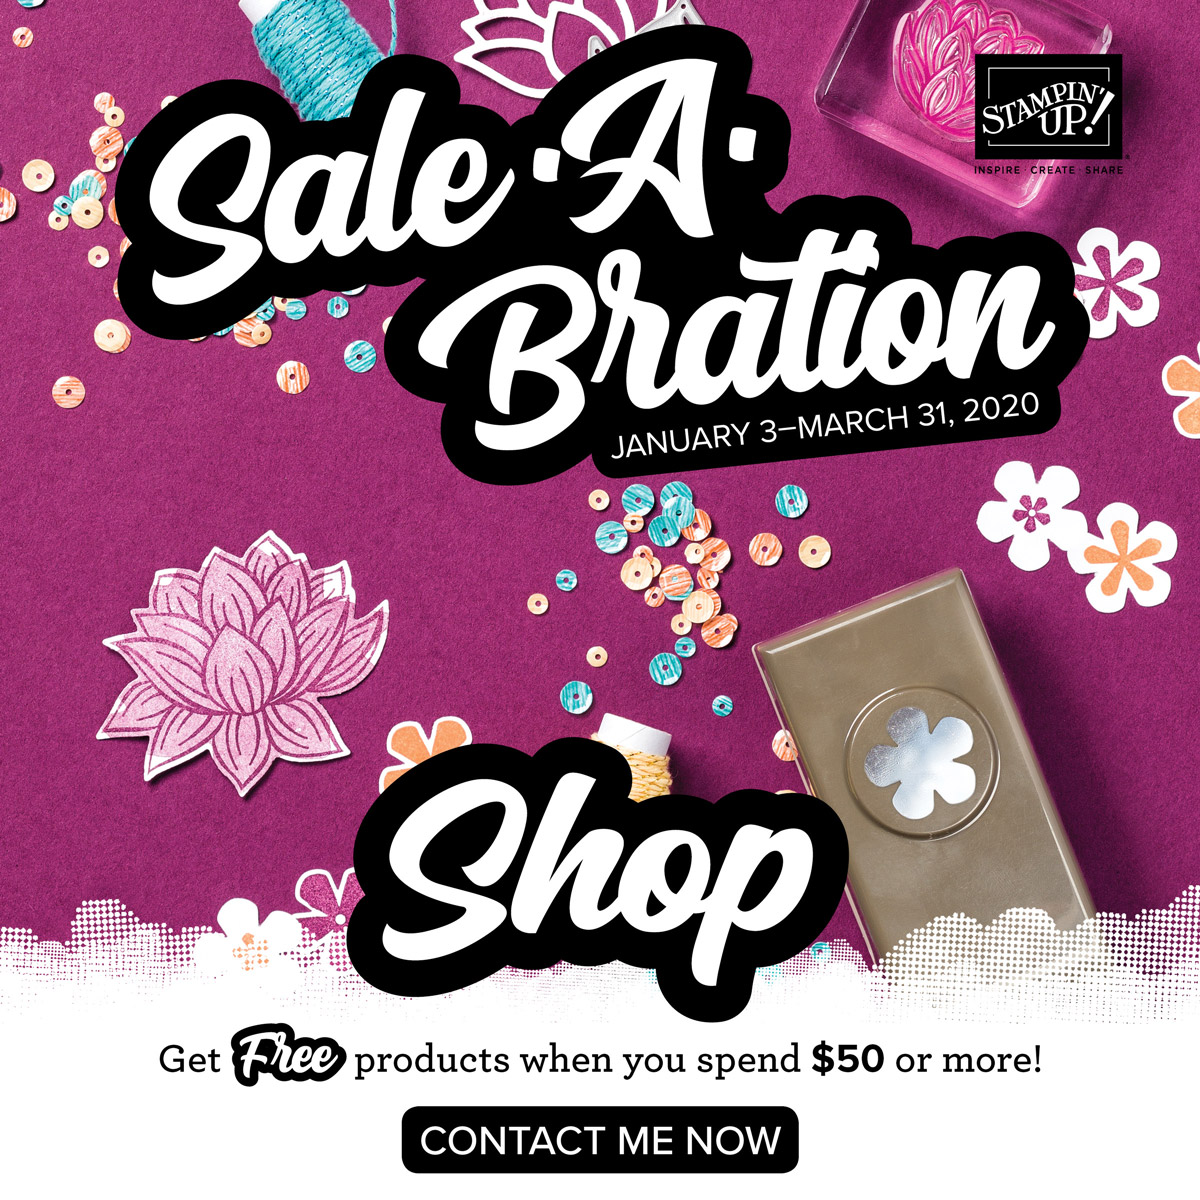 Beginning January 3, 2020 with a min. $50.00 order you can choose 1 item from the Sale-a-bration Brochure for FREE. Details on my blog here: https://wp.me/p59VWq-aGh